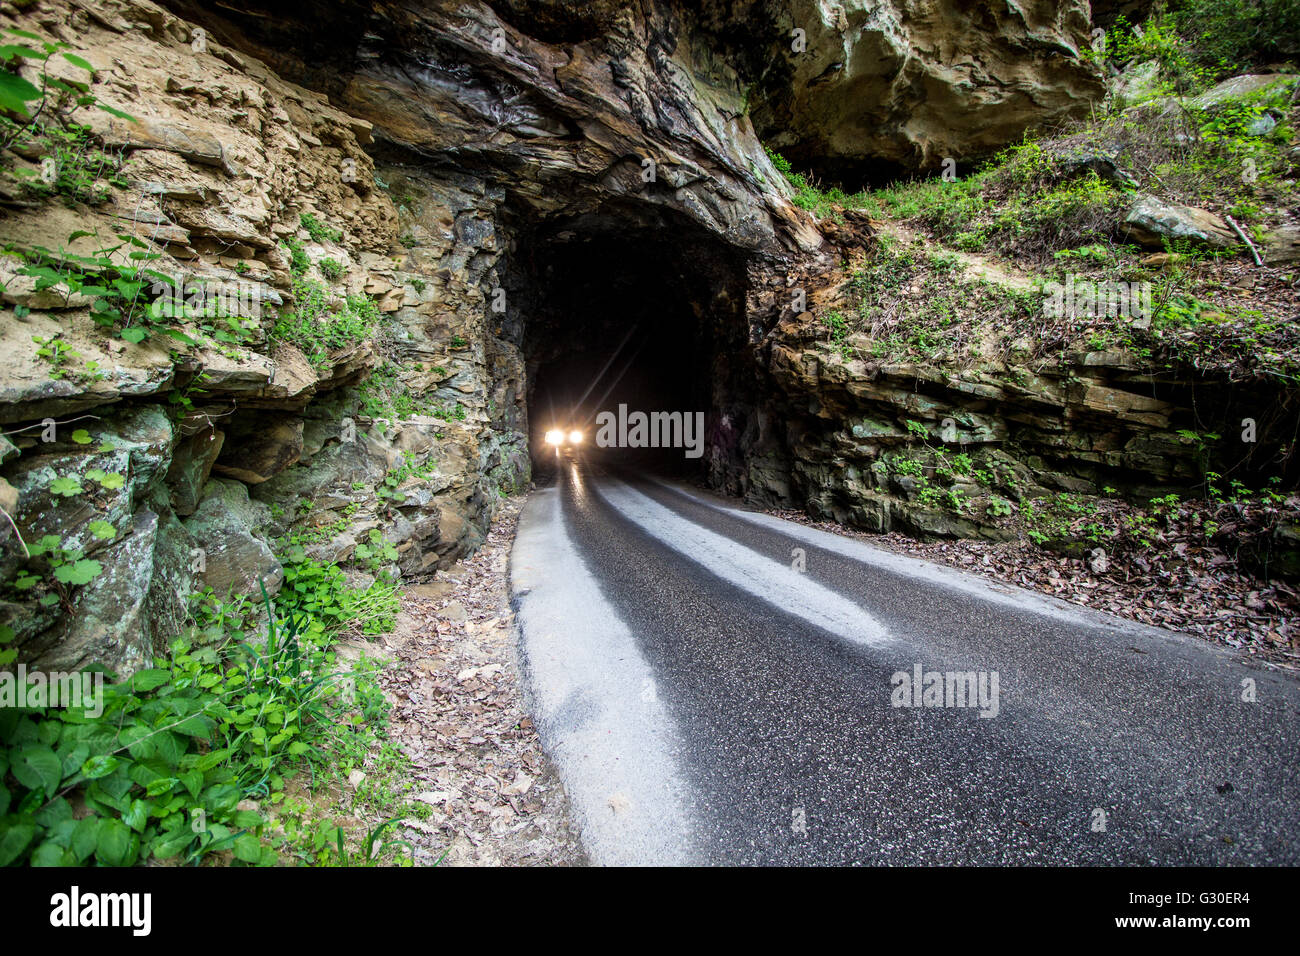 The 900 foot Nada Tunnel in the Red River Gorge of Kentucky. Open to traffic, the harrowing one way tunnel is a thoroughfare for Stock Photo